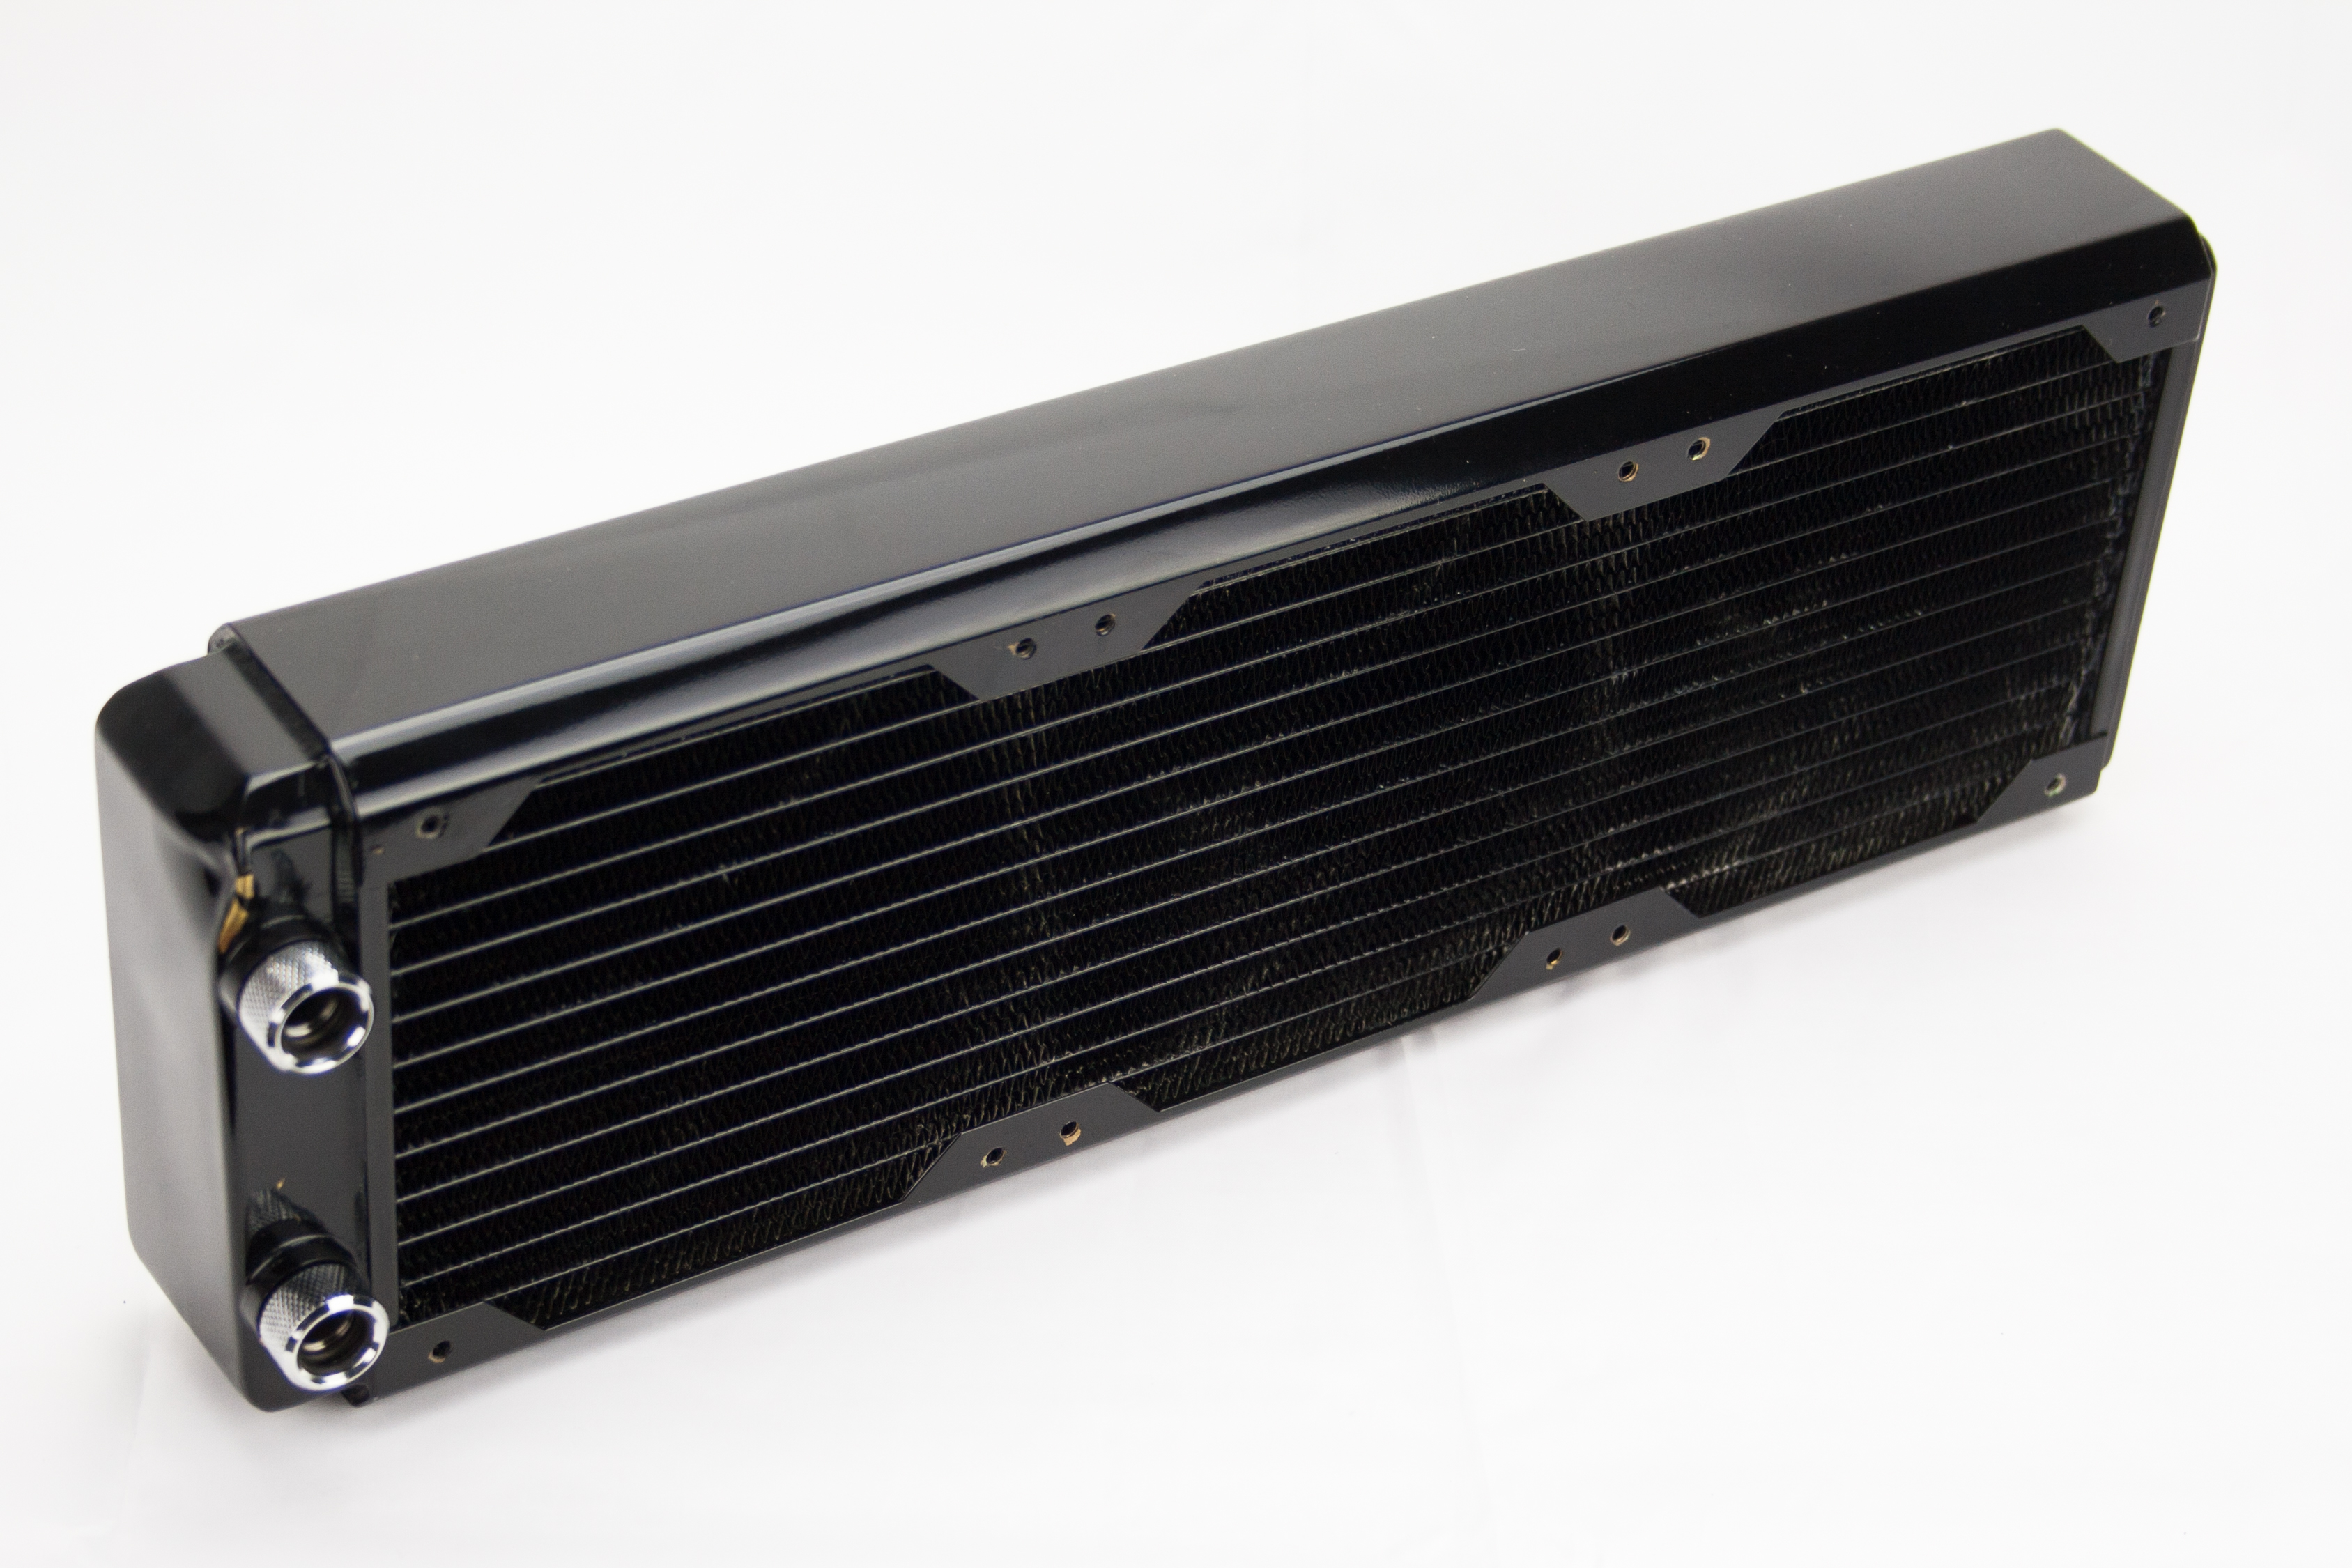 Hardware Labs Black Ice® GTX 360mm Radiator Review - Page 2 of 6 